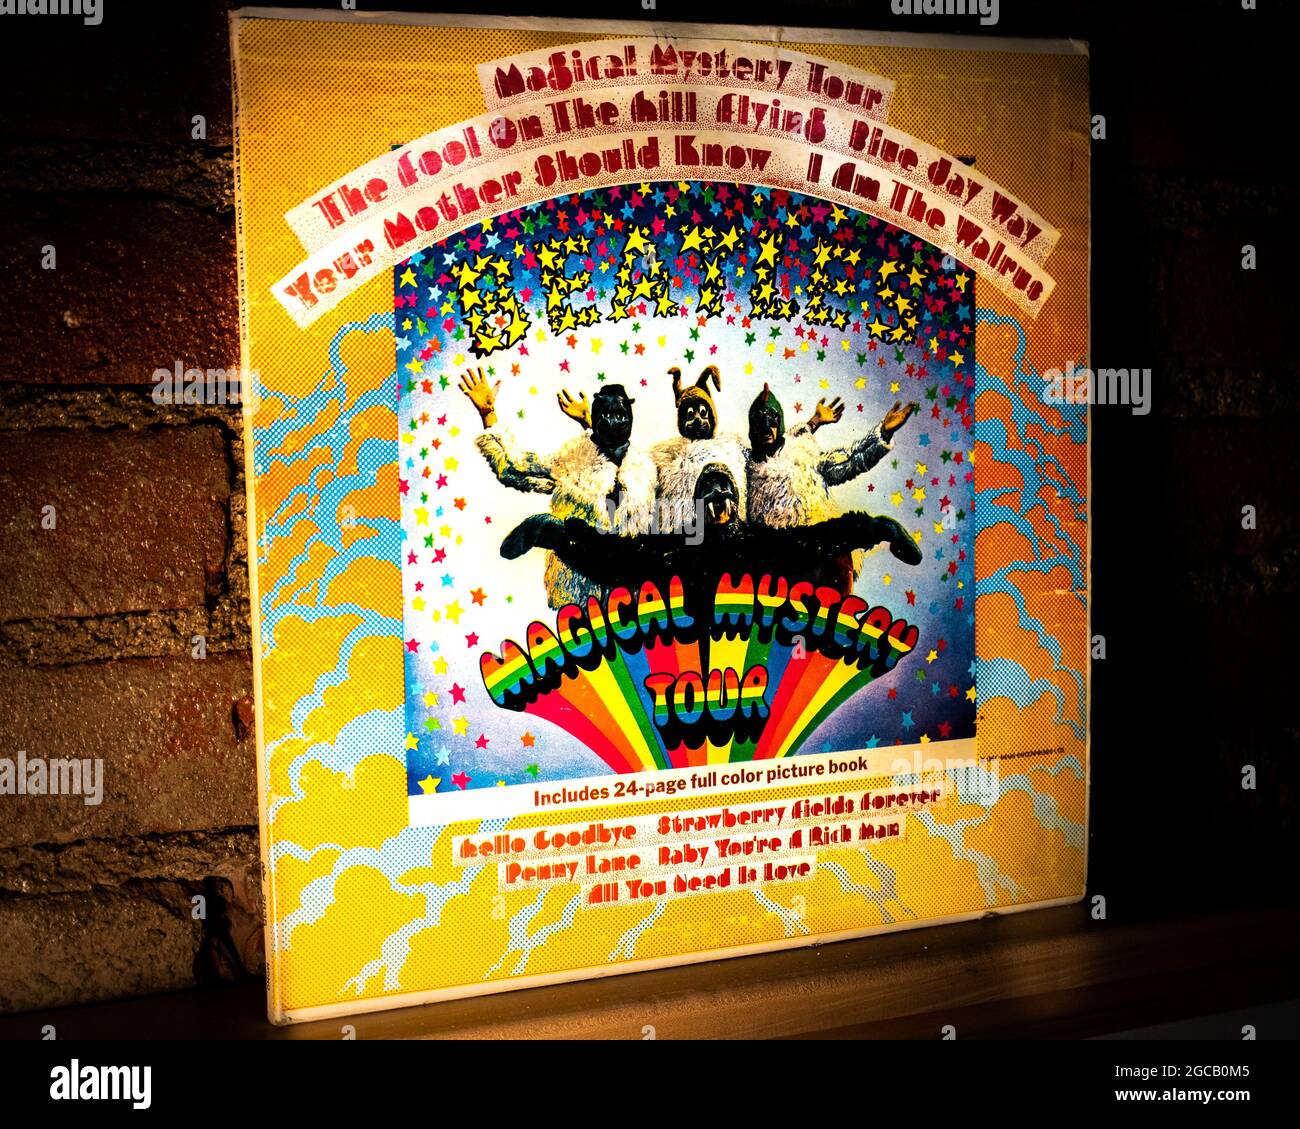 Closeup of The Beatles Magical Mystery Tour Vinyl Record Cover Leaning Against Brick Wall Stock Photo